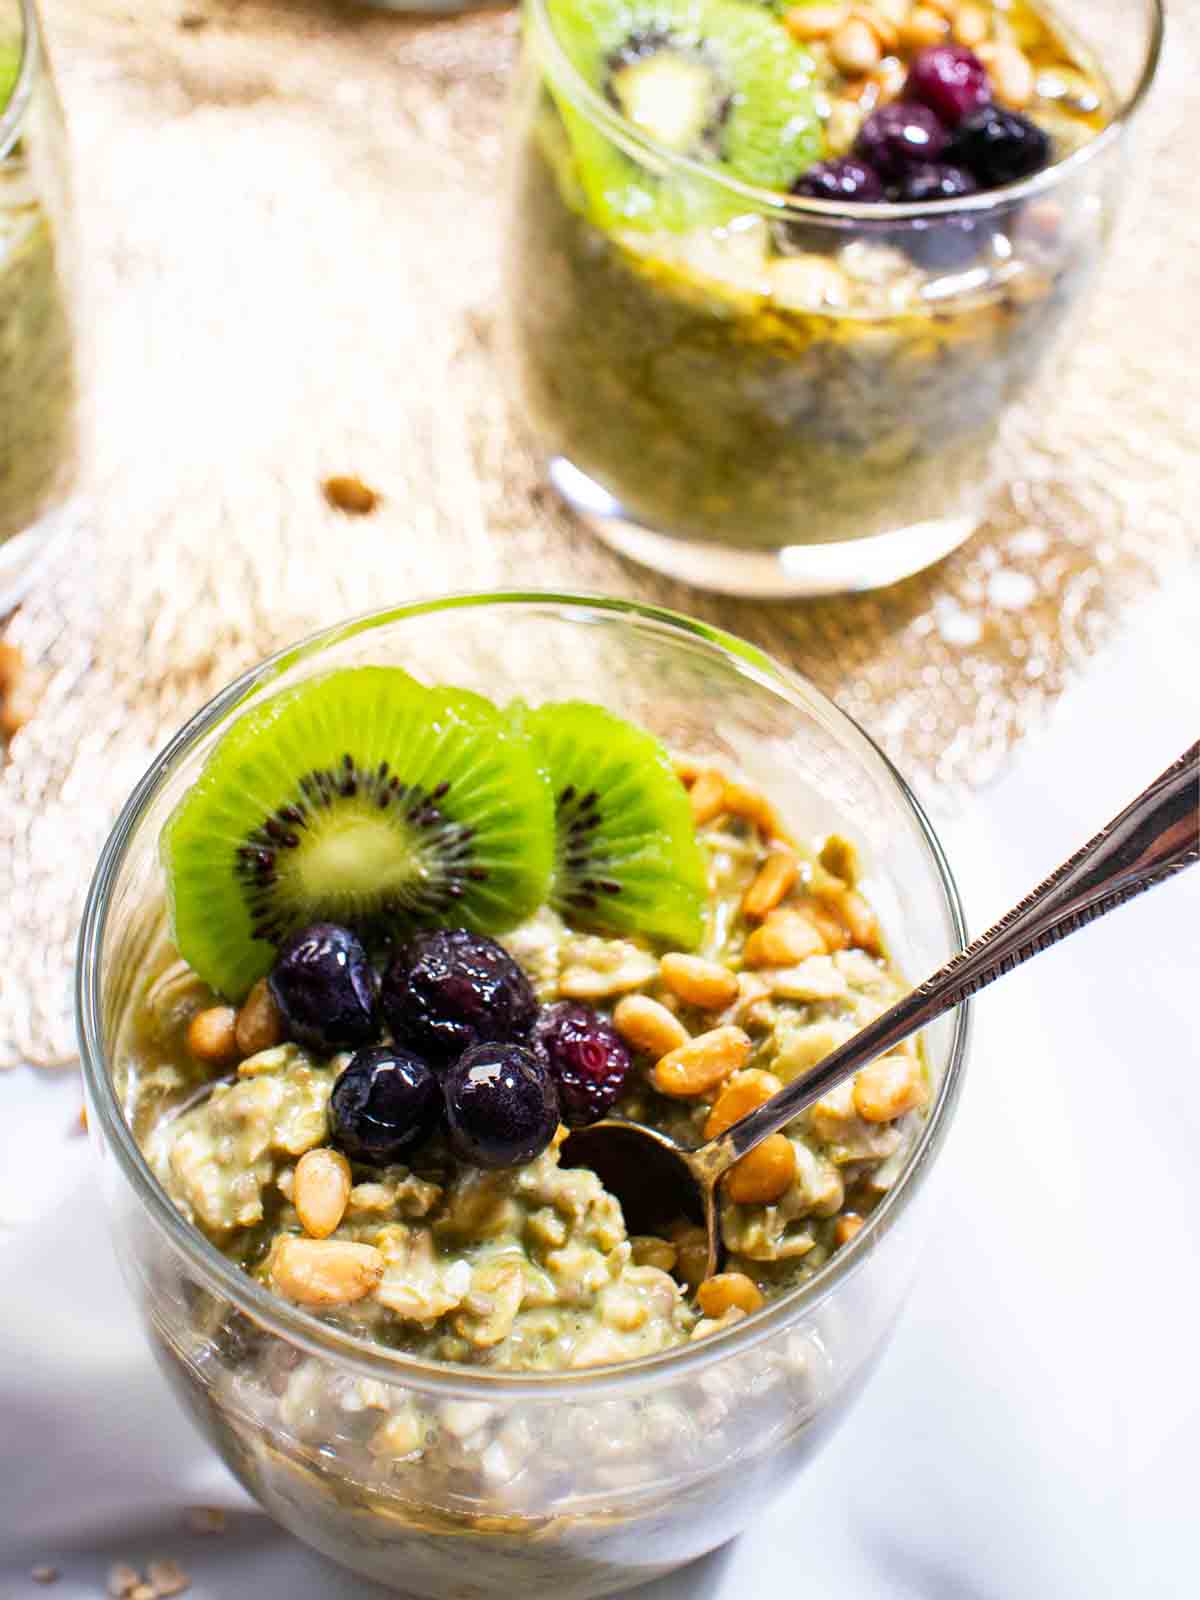 Varies toppings for matcha overnight oats